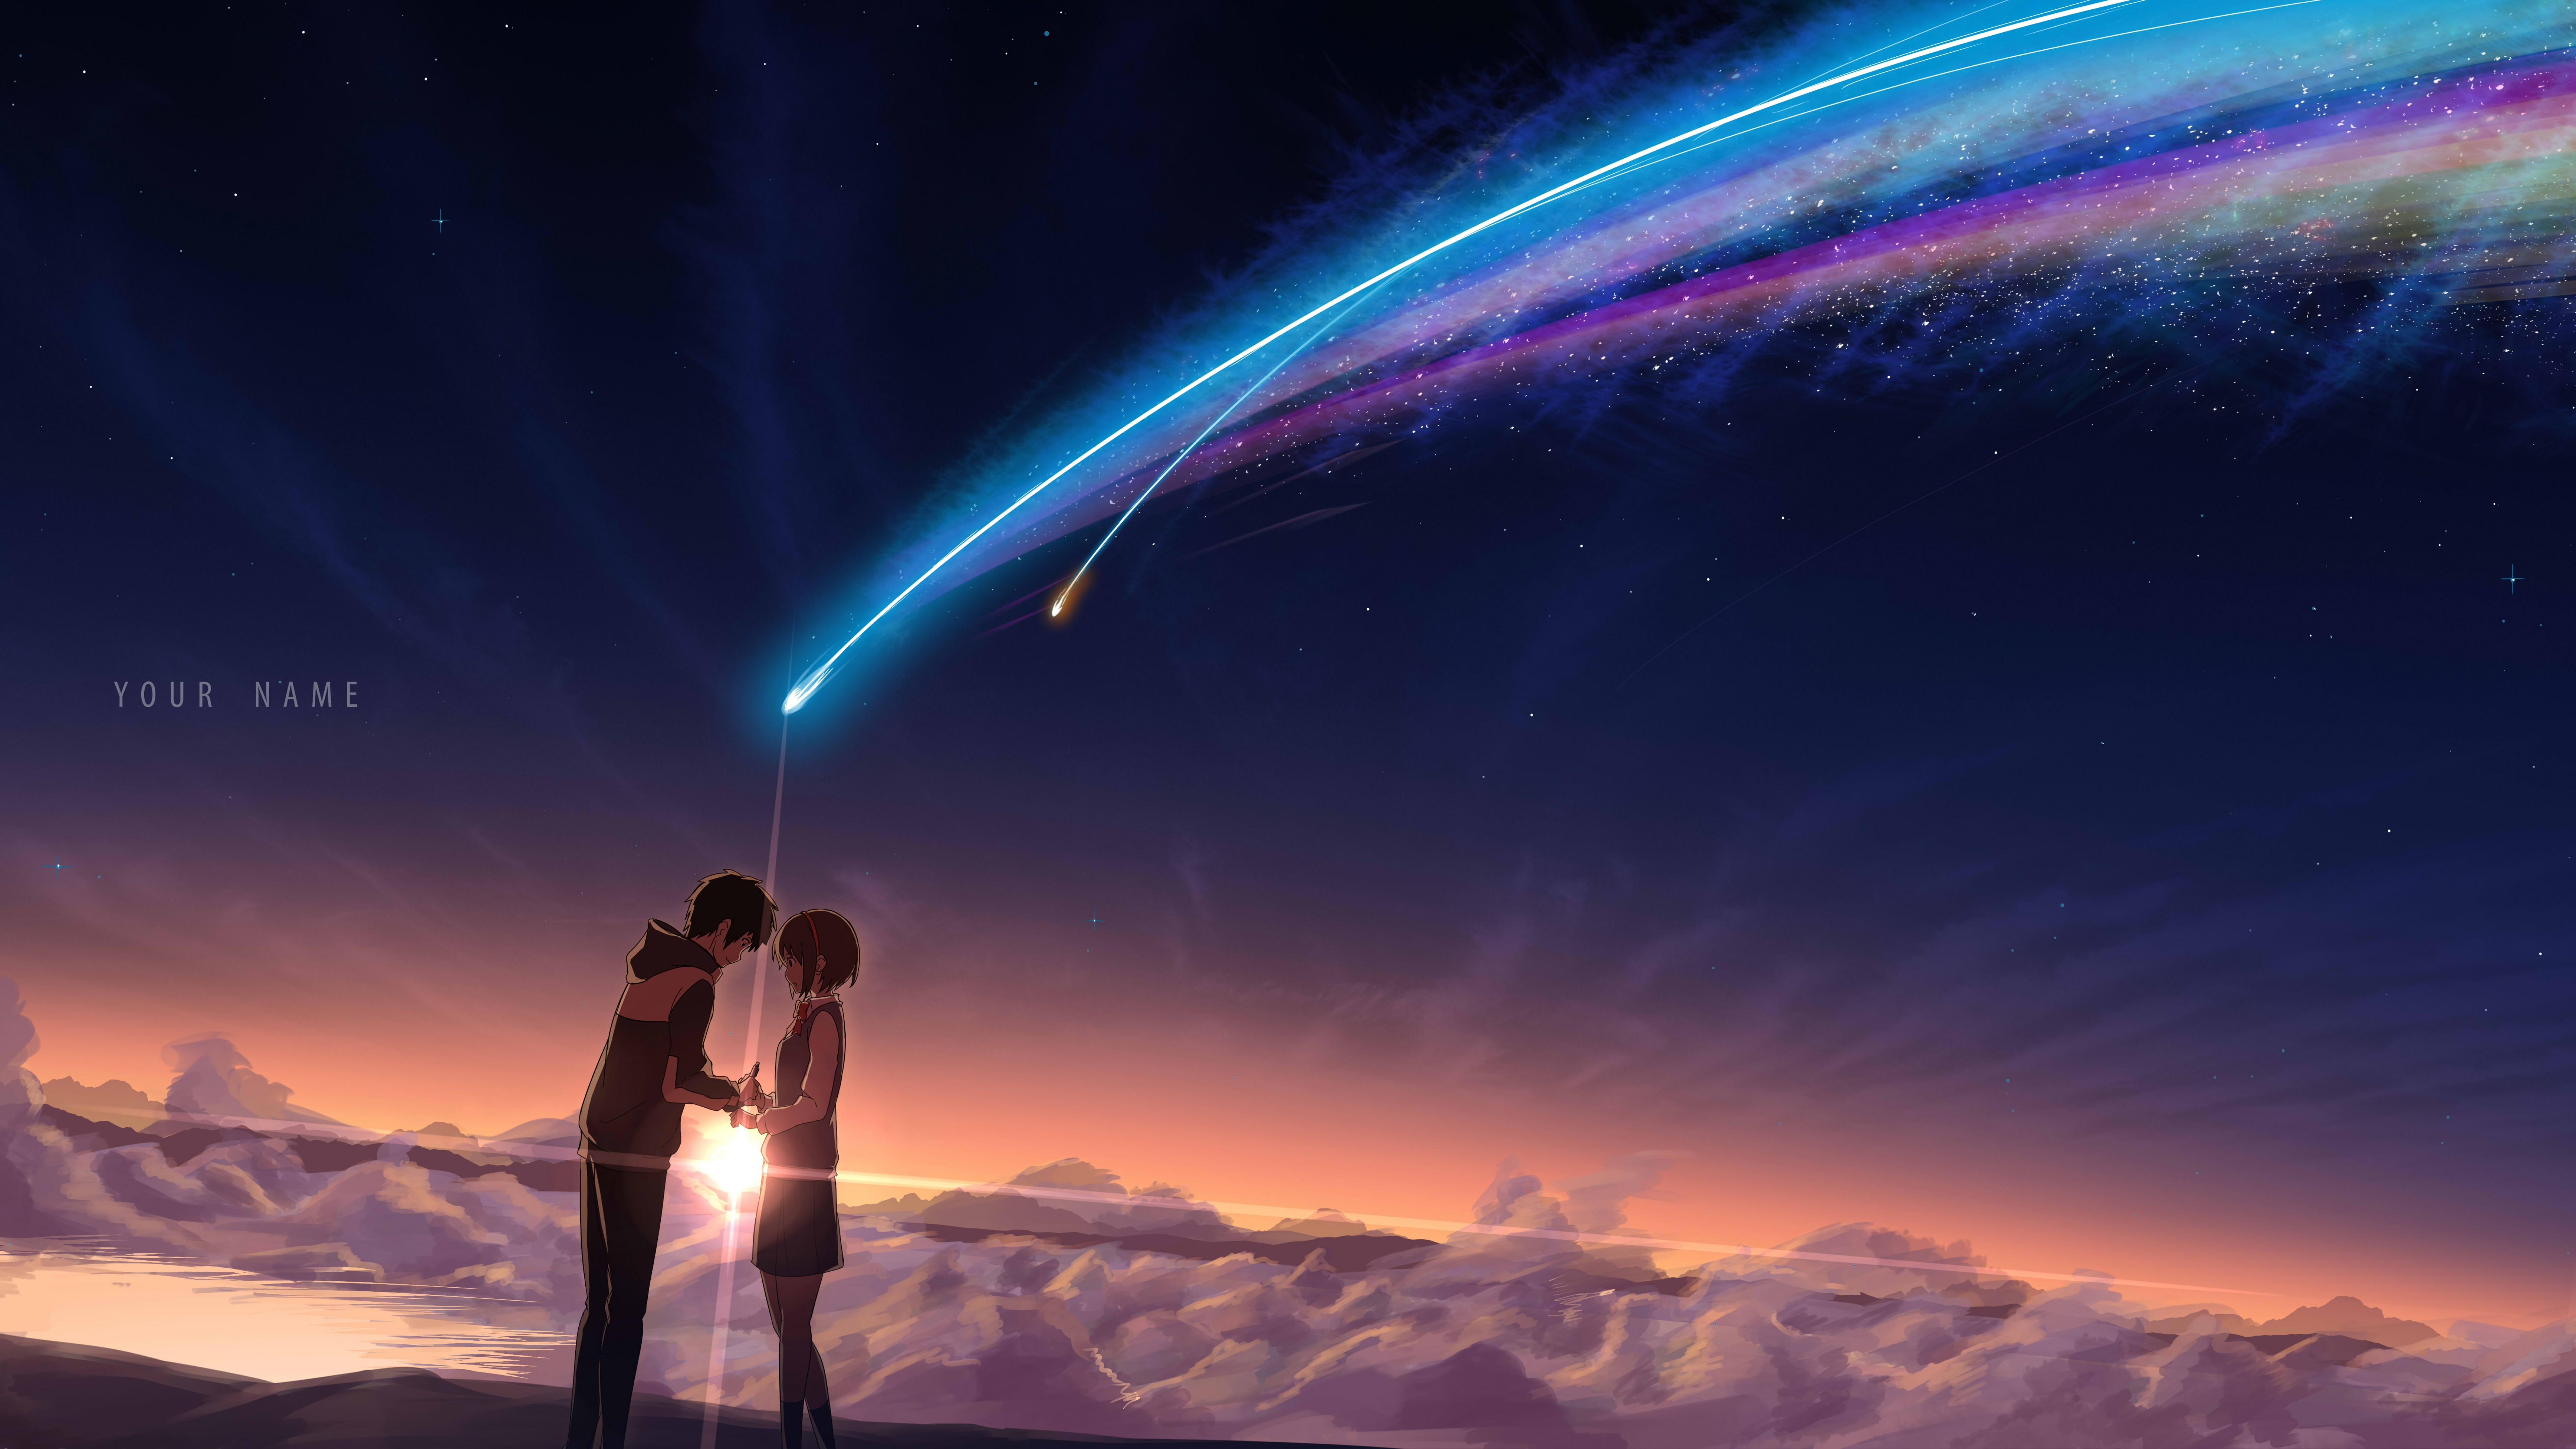 Anime Space Wallpapers